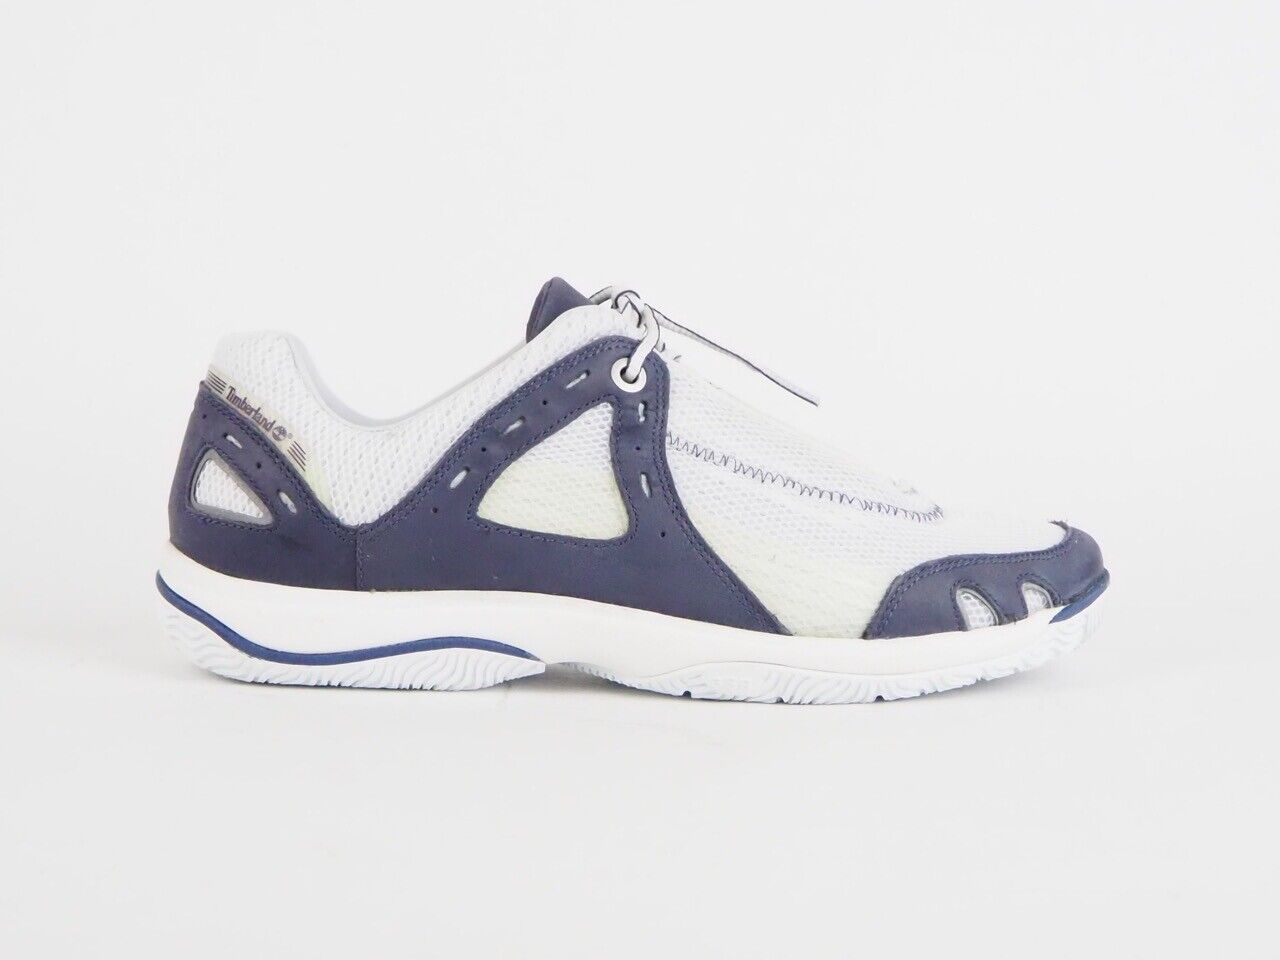 Womens Timberland Formentor Oxford 27642 White Navy Leather Exercise Trainers - London Top Style